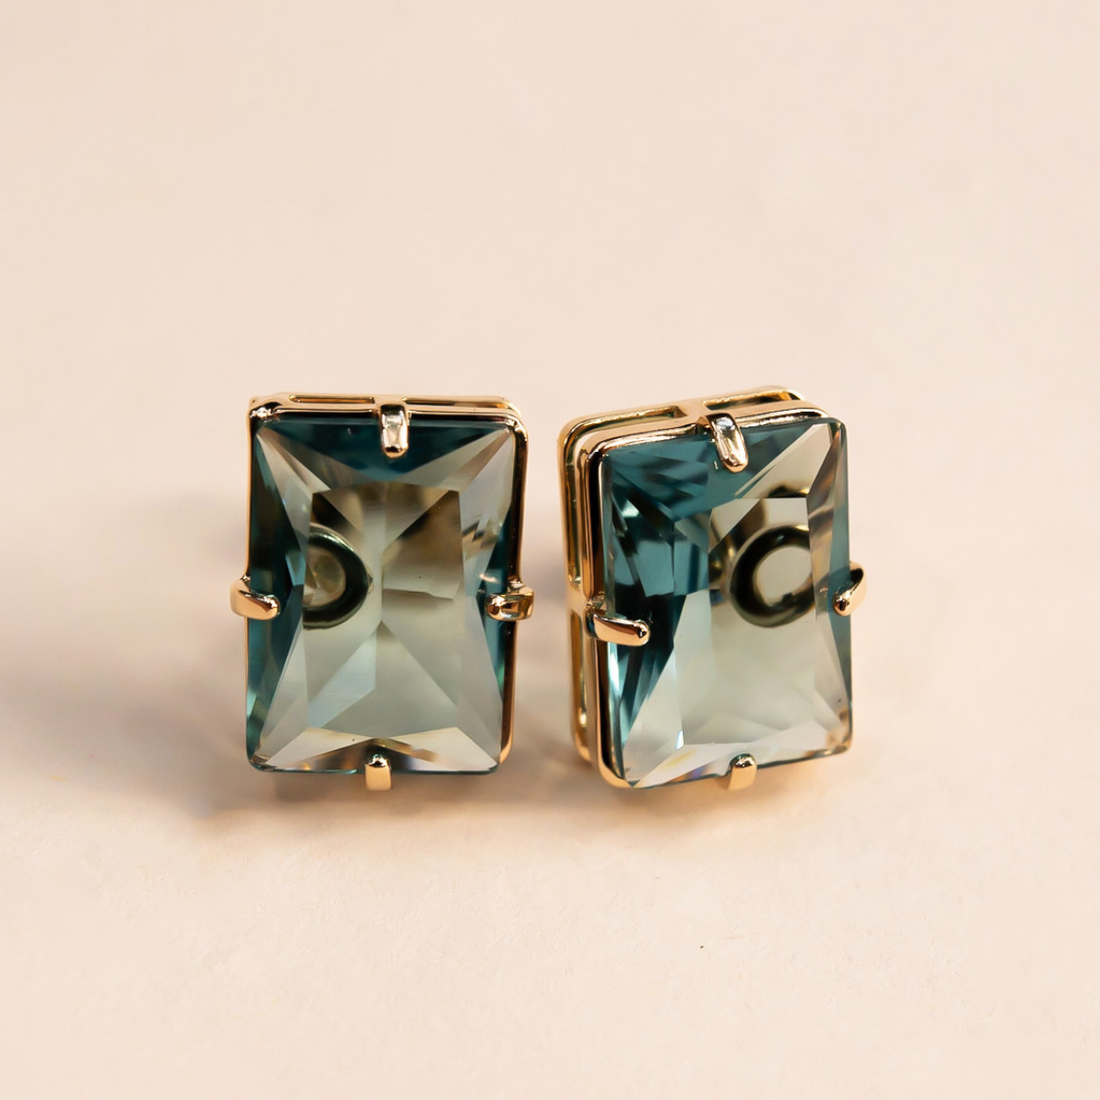 Rock Candy Earrings Shop Jewelry Online at MCHARMS